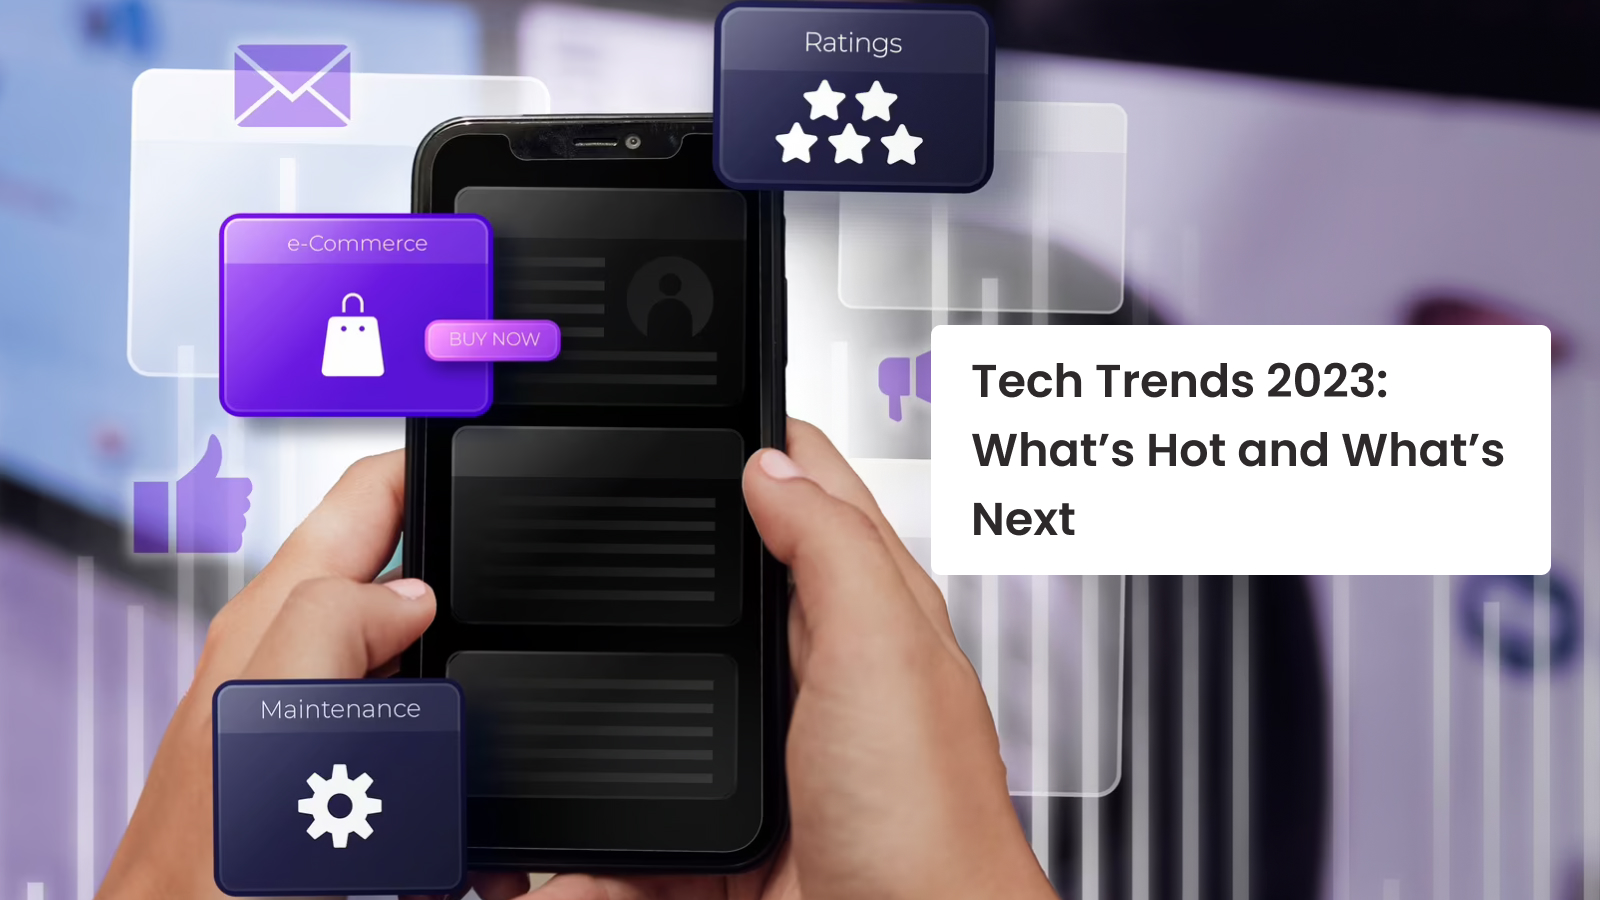 Tech Trends 2023: What's Hot and What's Next